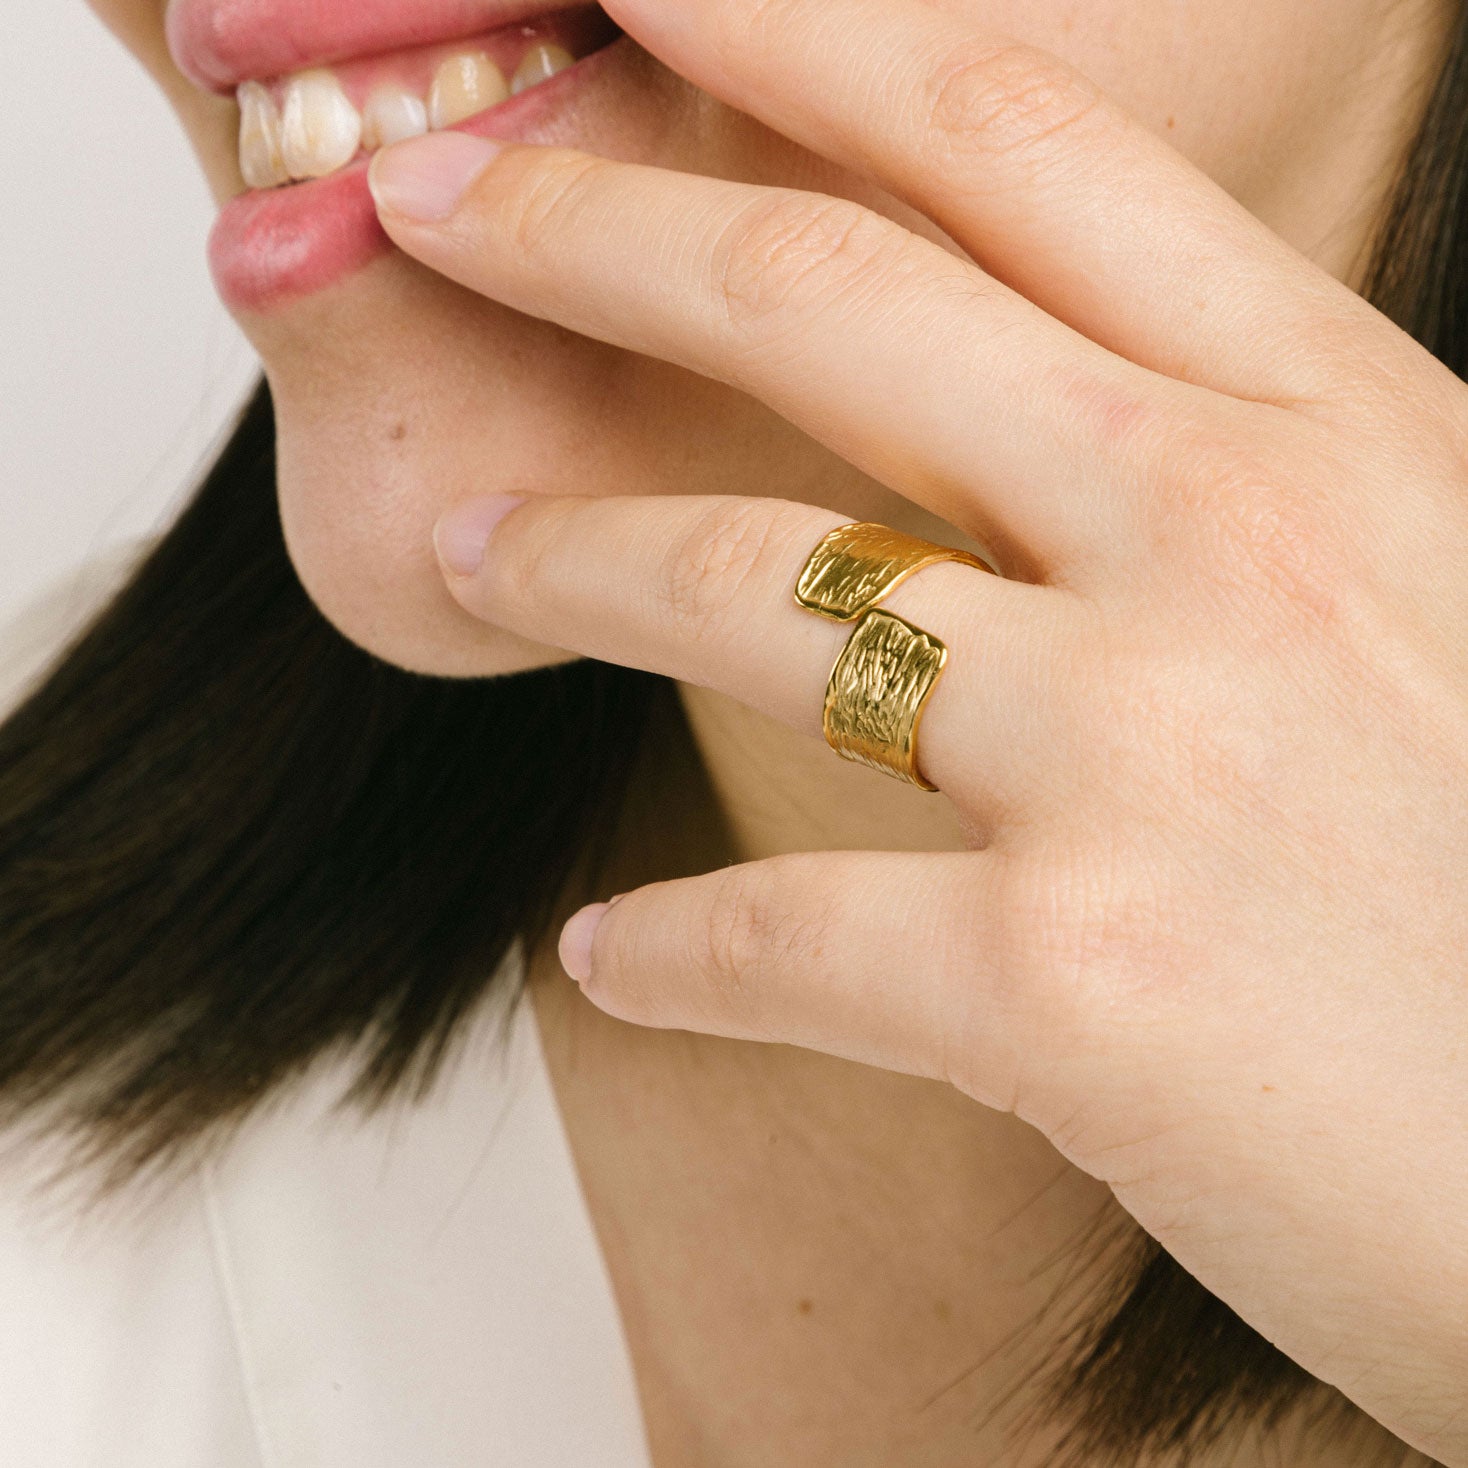 A model wearing the Textured Curl Ring in Gold is adjustable between sizes 7-10, crafted using 14K Gold Plated Stainless Steel for durability and resistance to tarnish, water, and lead, nickel, and cadmium. Please note that only one ring is included.